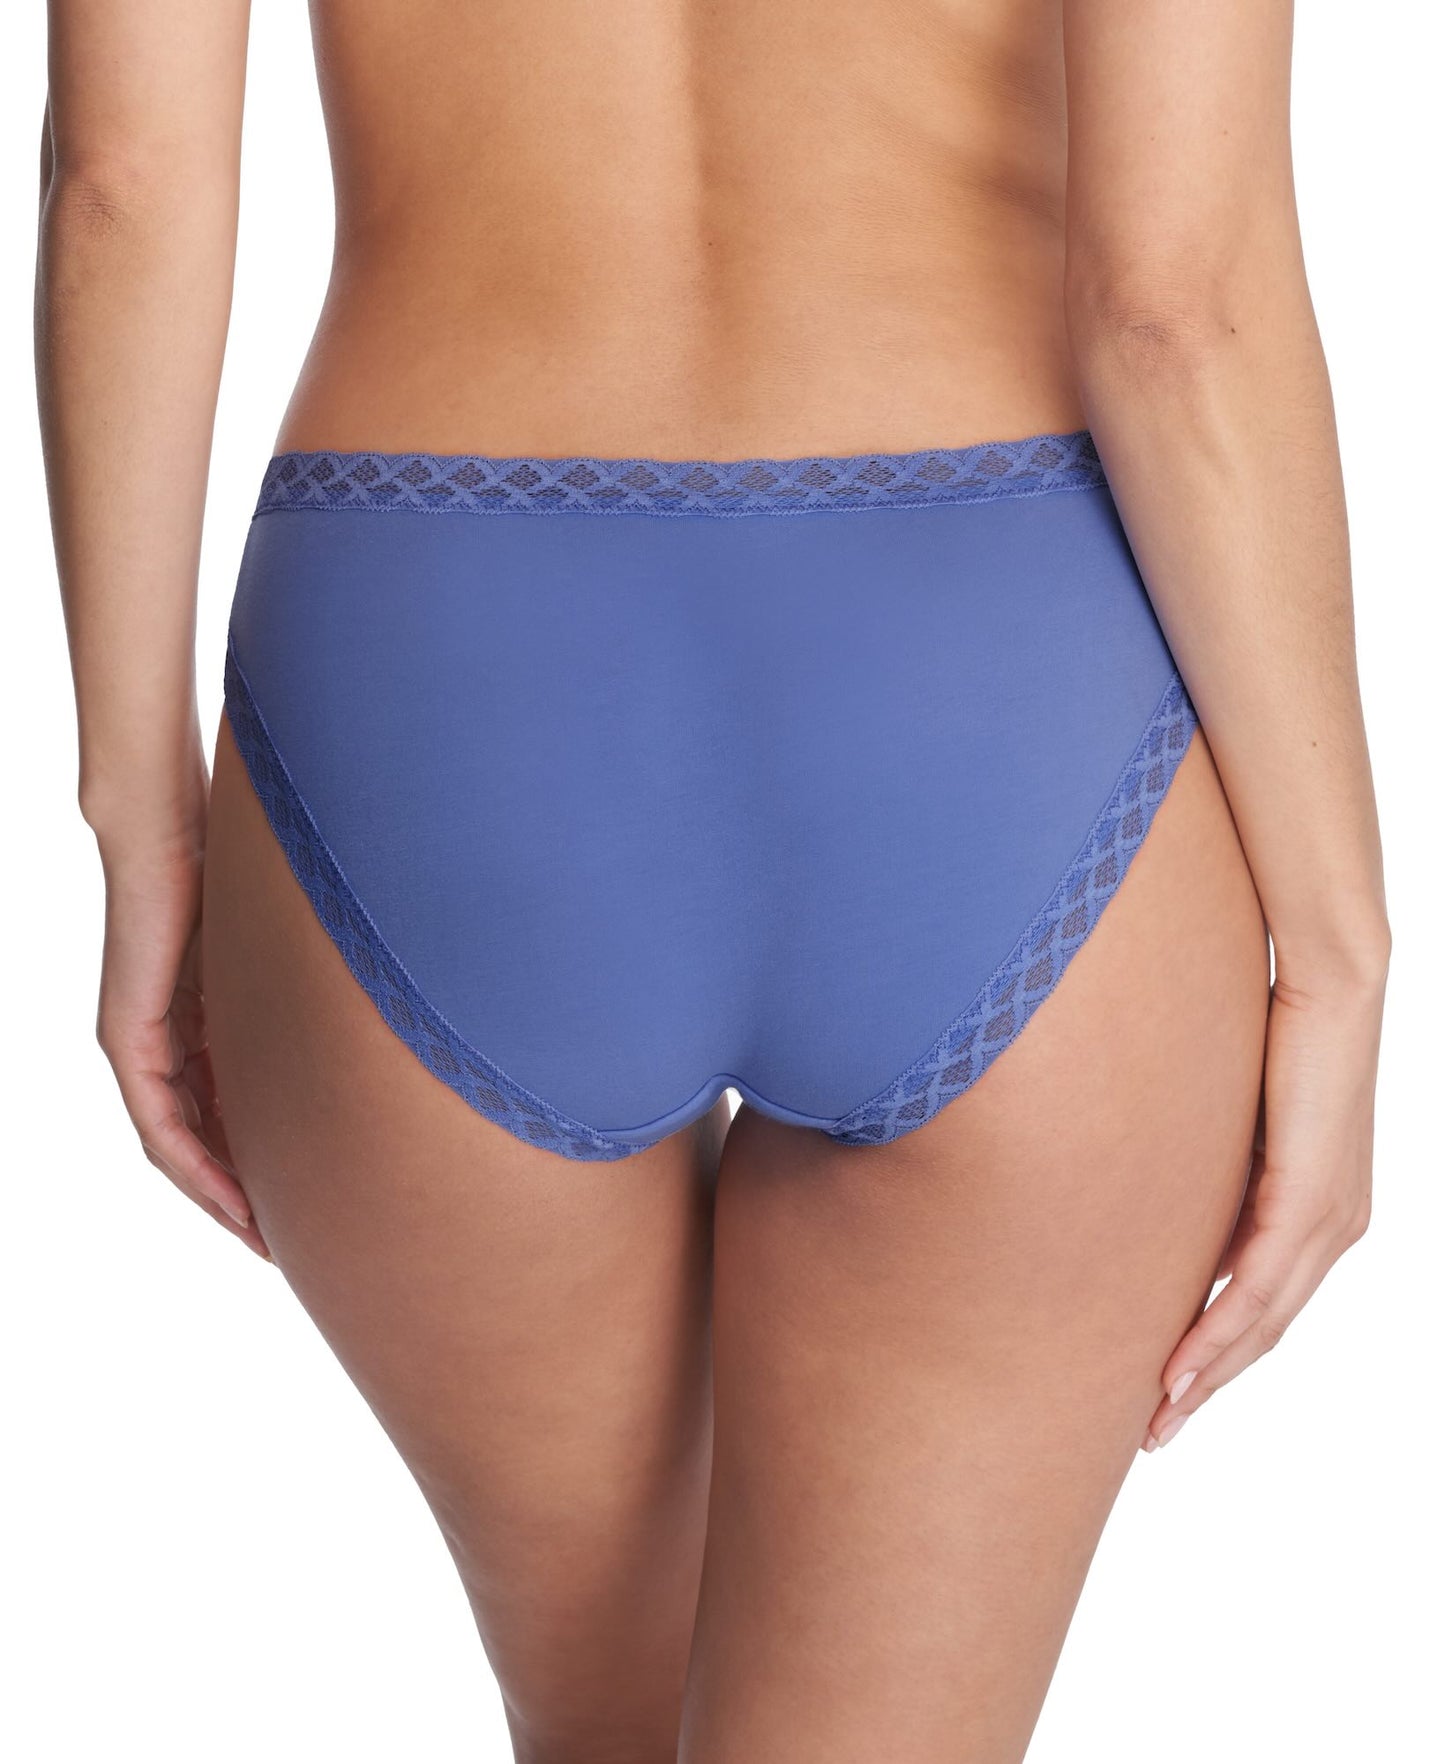 Bliss Girl brief - new late spring colors